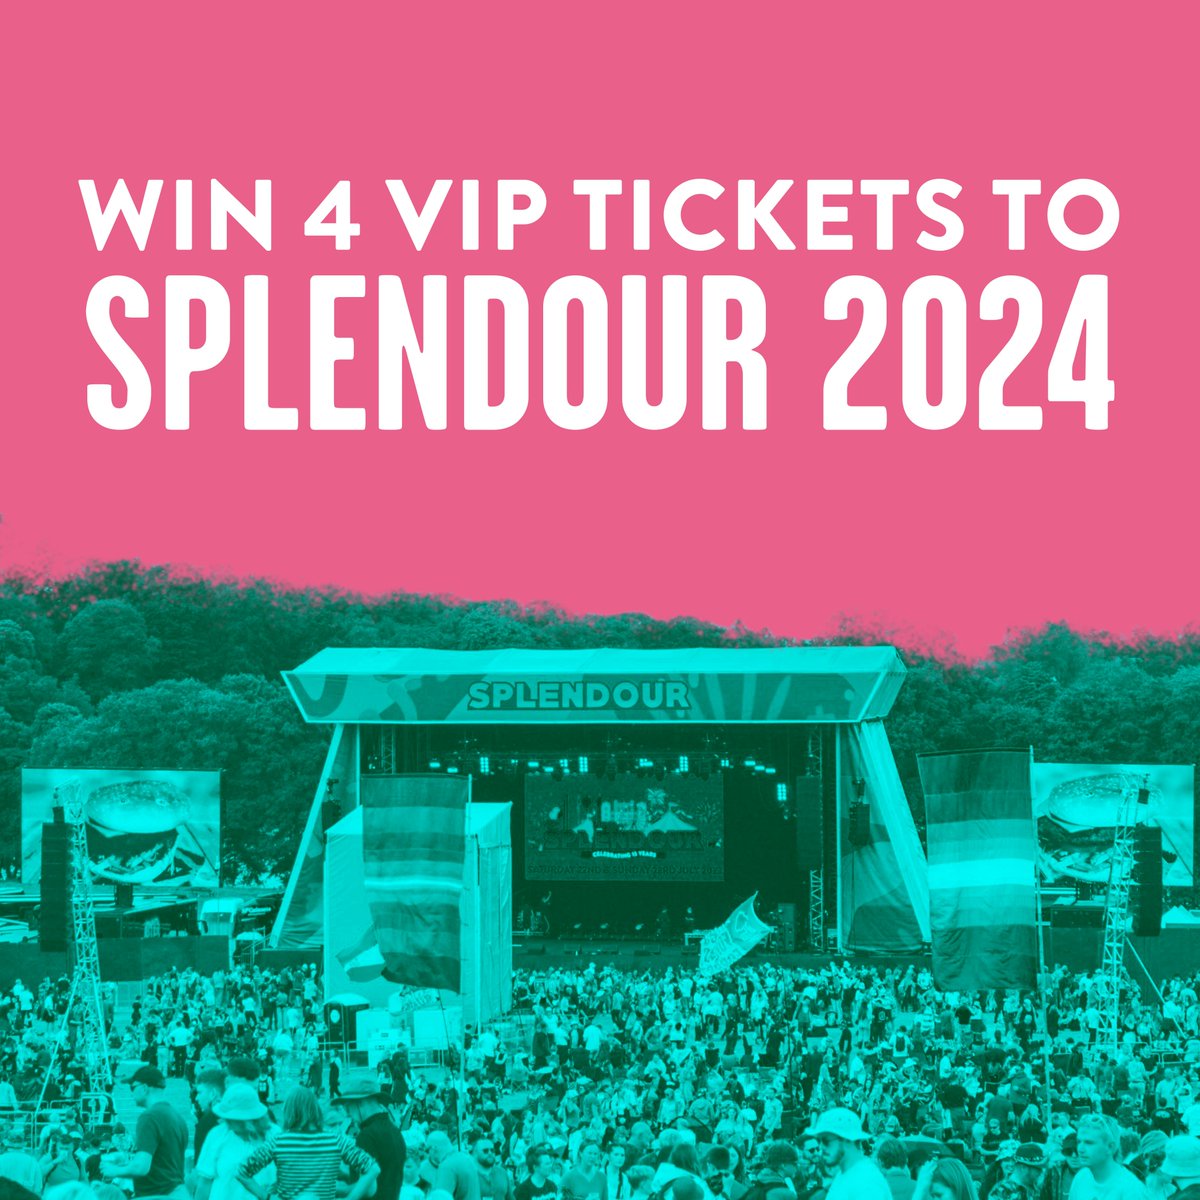 Splendour wouldn’t be what it was without you lot. For that reason, we need your feedback! Fill in the survey to be in with a chance of winning 4 VIP tickets for Splendour Festival 2024! Competition closes at the end of August: bit.ly/3OT5kFc